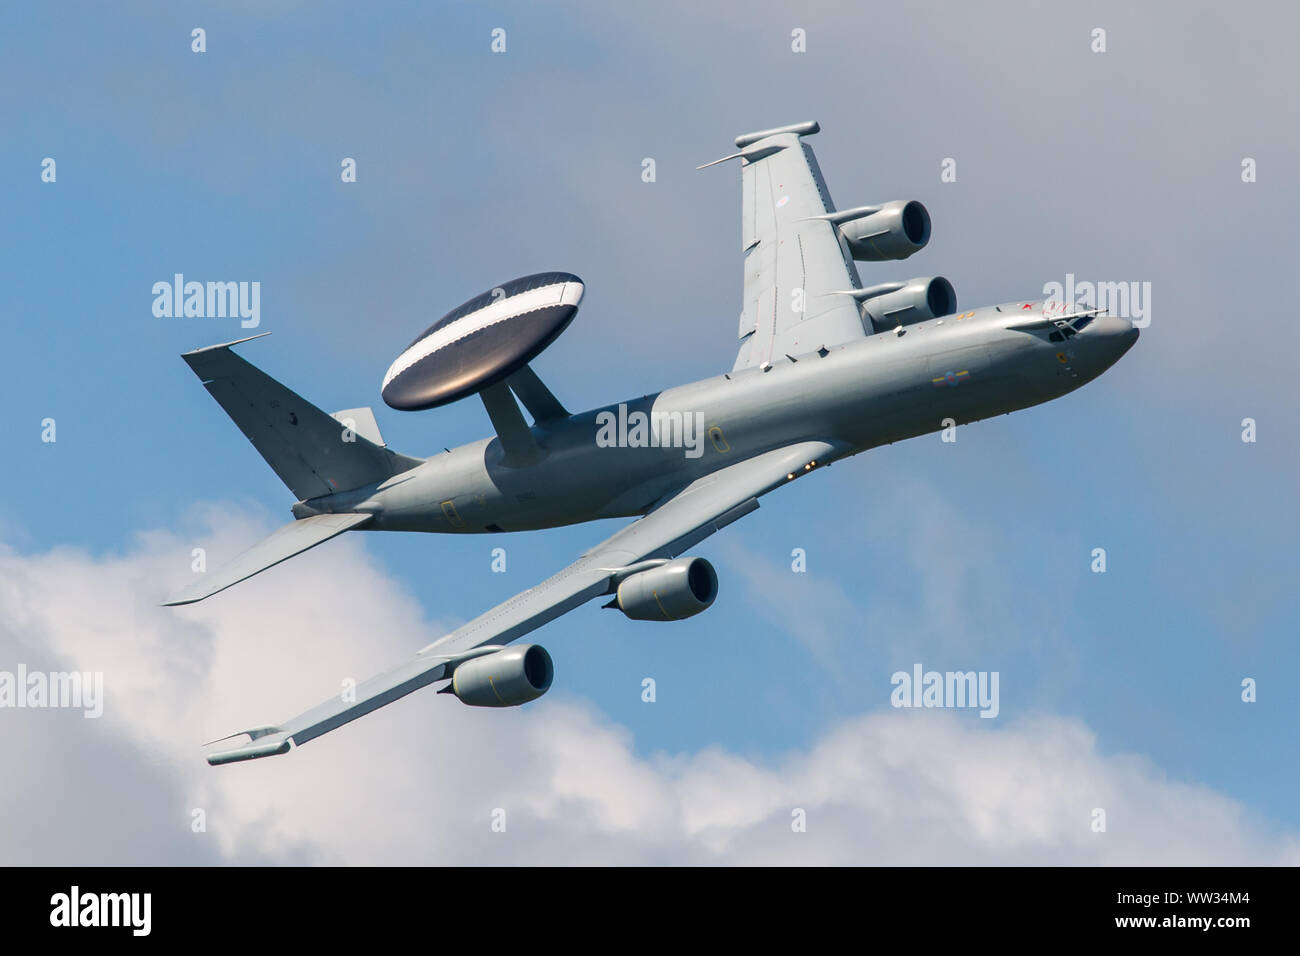 Royal Air Force Boeing E 3d Sentry Aew 1 Awacs Aircraft Of 8sqn And 23sqn Based At Raf Waddington In Lincolnshire England Stock Photo Alamy